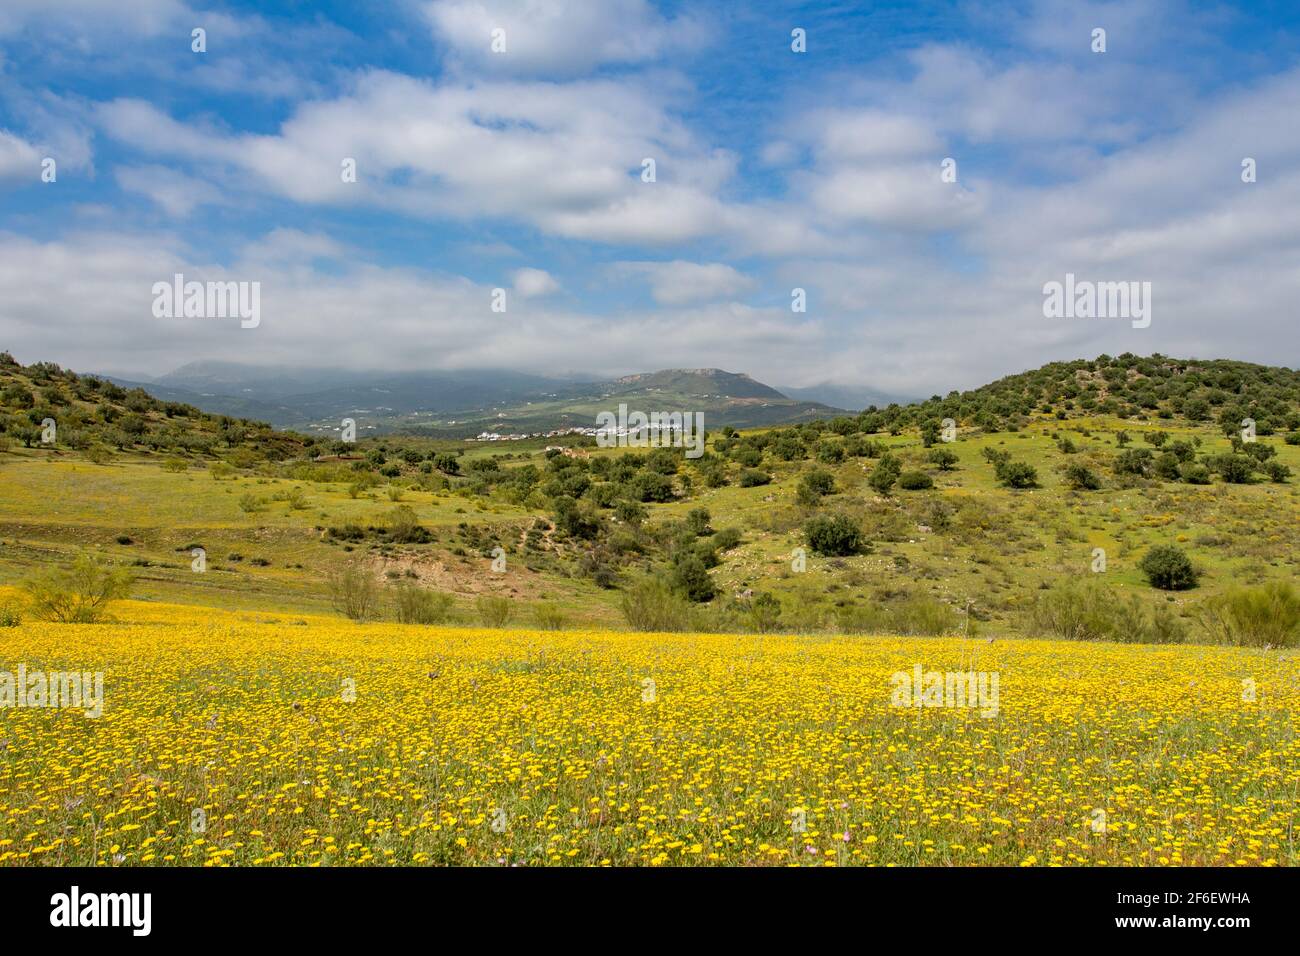 Yellow flowers stretch out over a field with olive trees and mountains in the distance Stock Photo